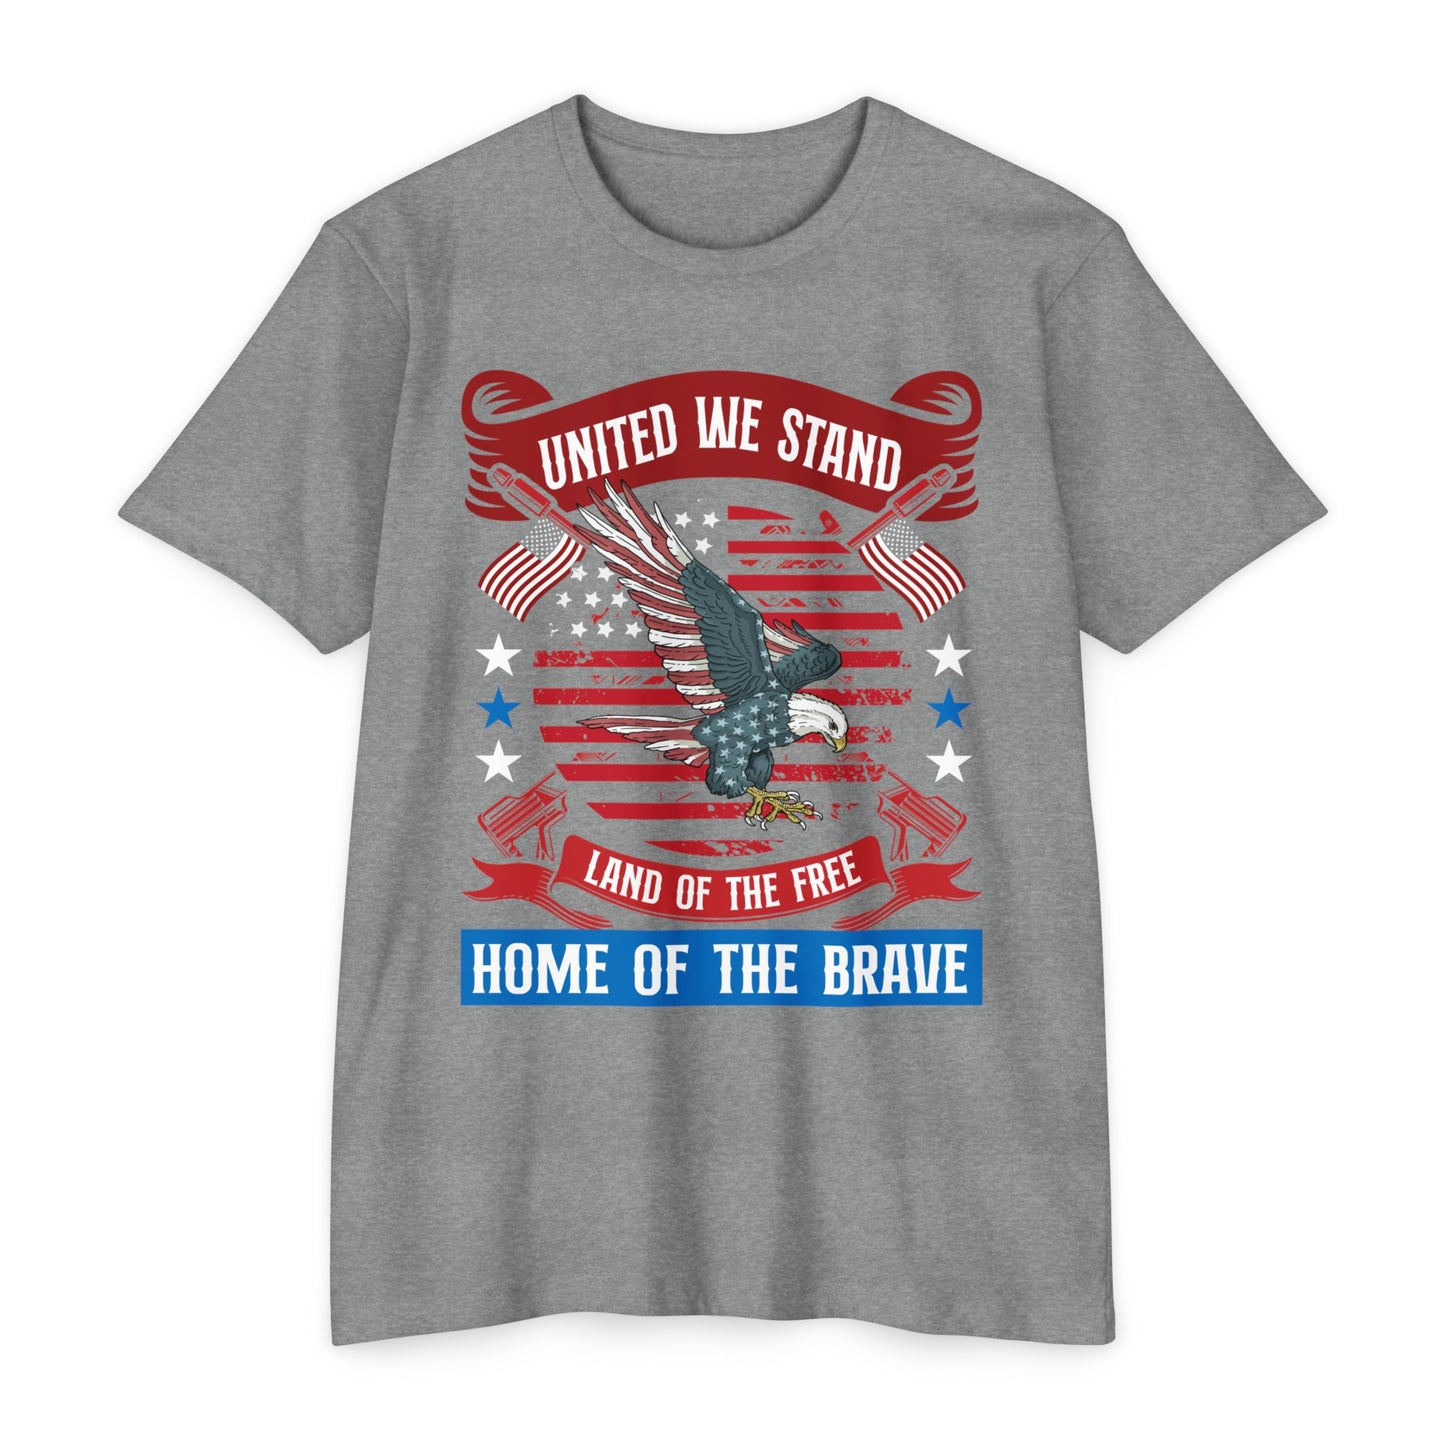 Home of the Brave Blended Tee